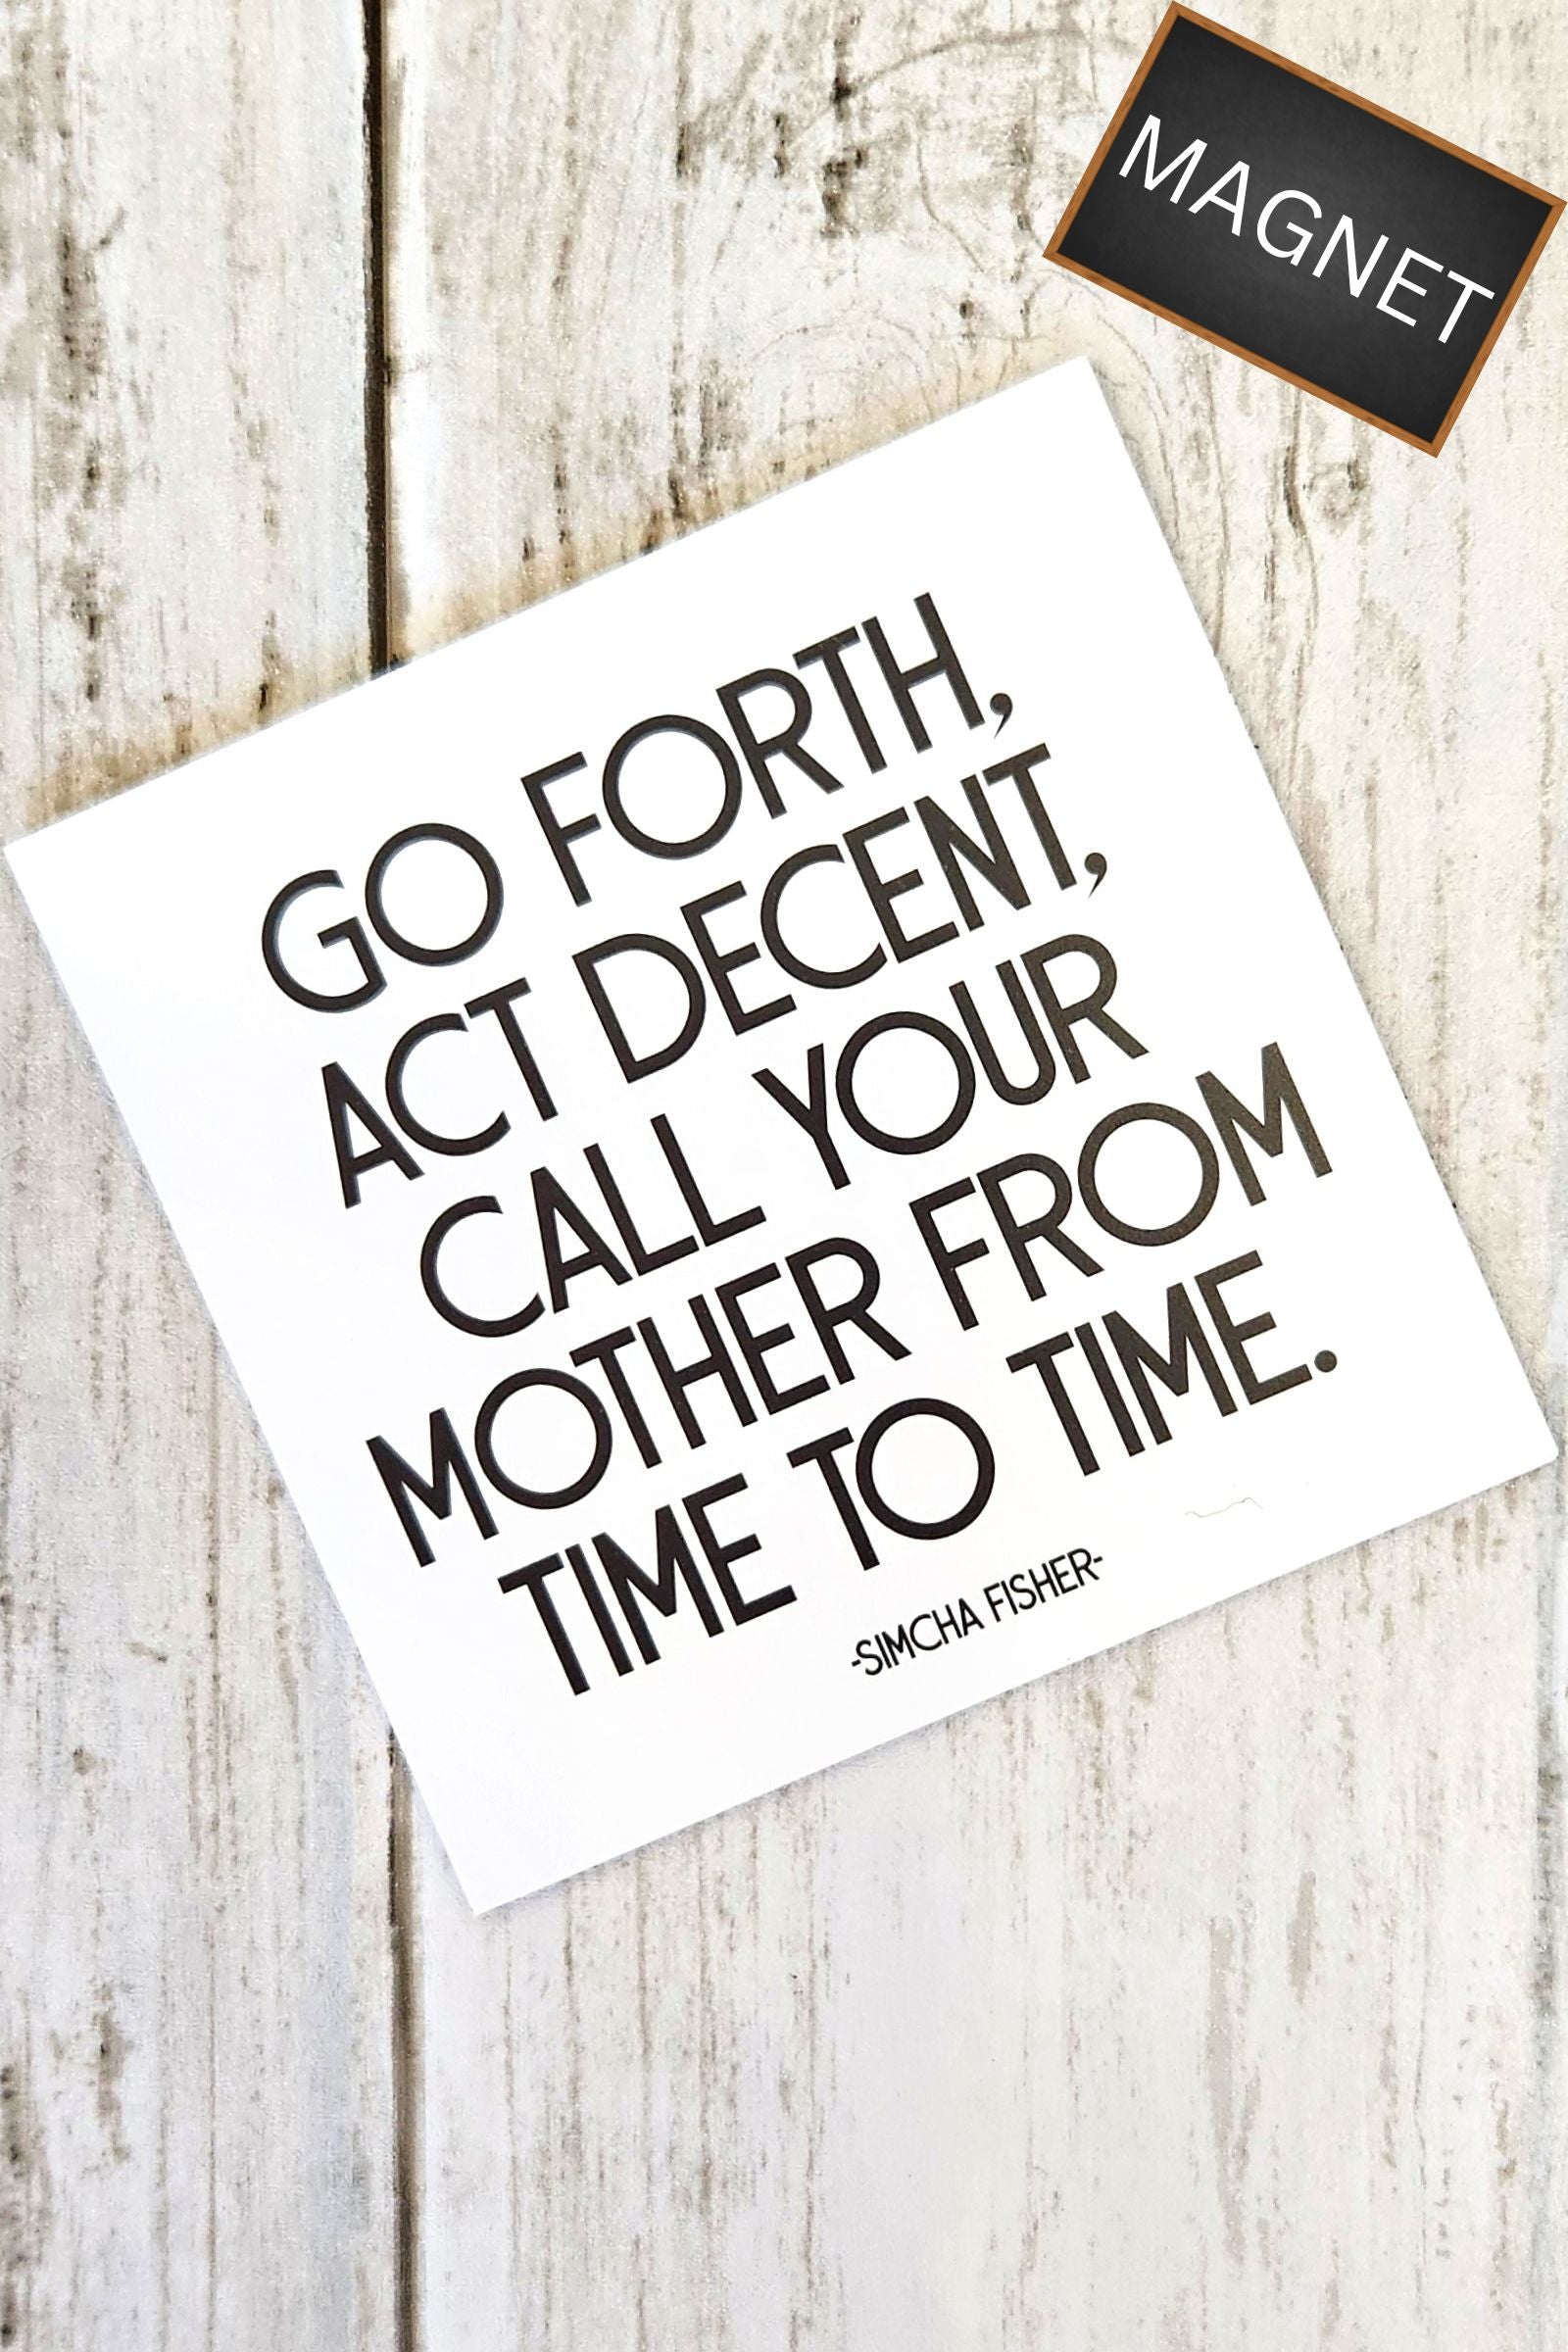 Call Your Mother Inspirational Magnet